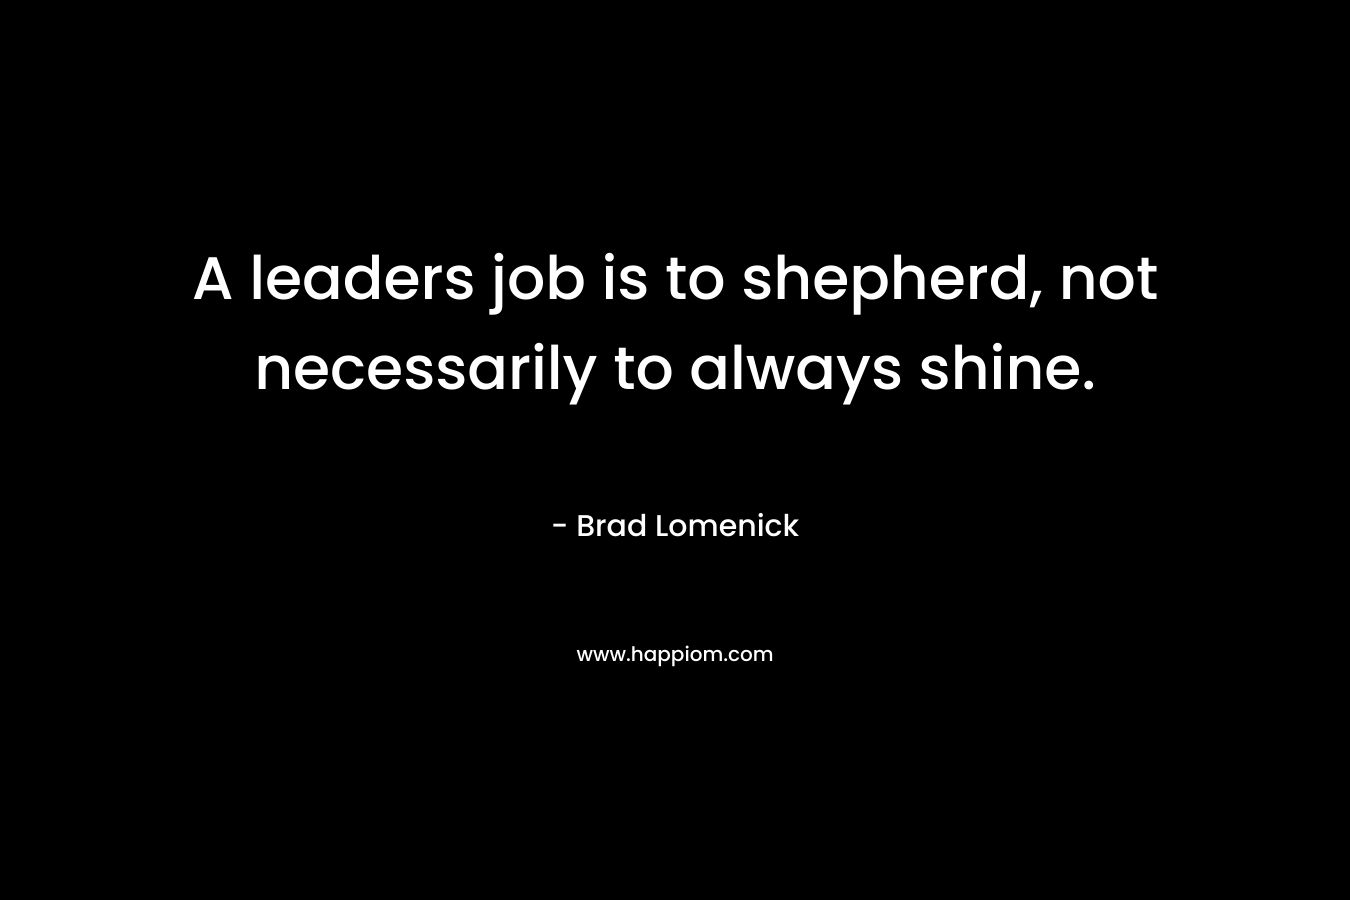 A leaders job is to shepherd, not necessarily to always shine.